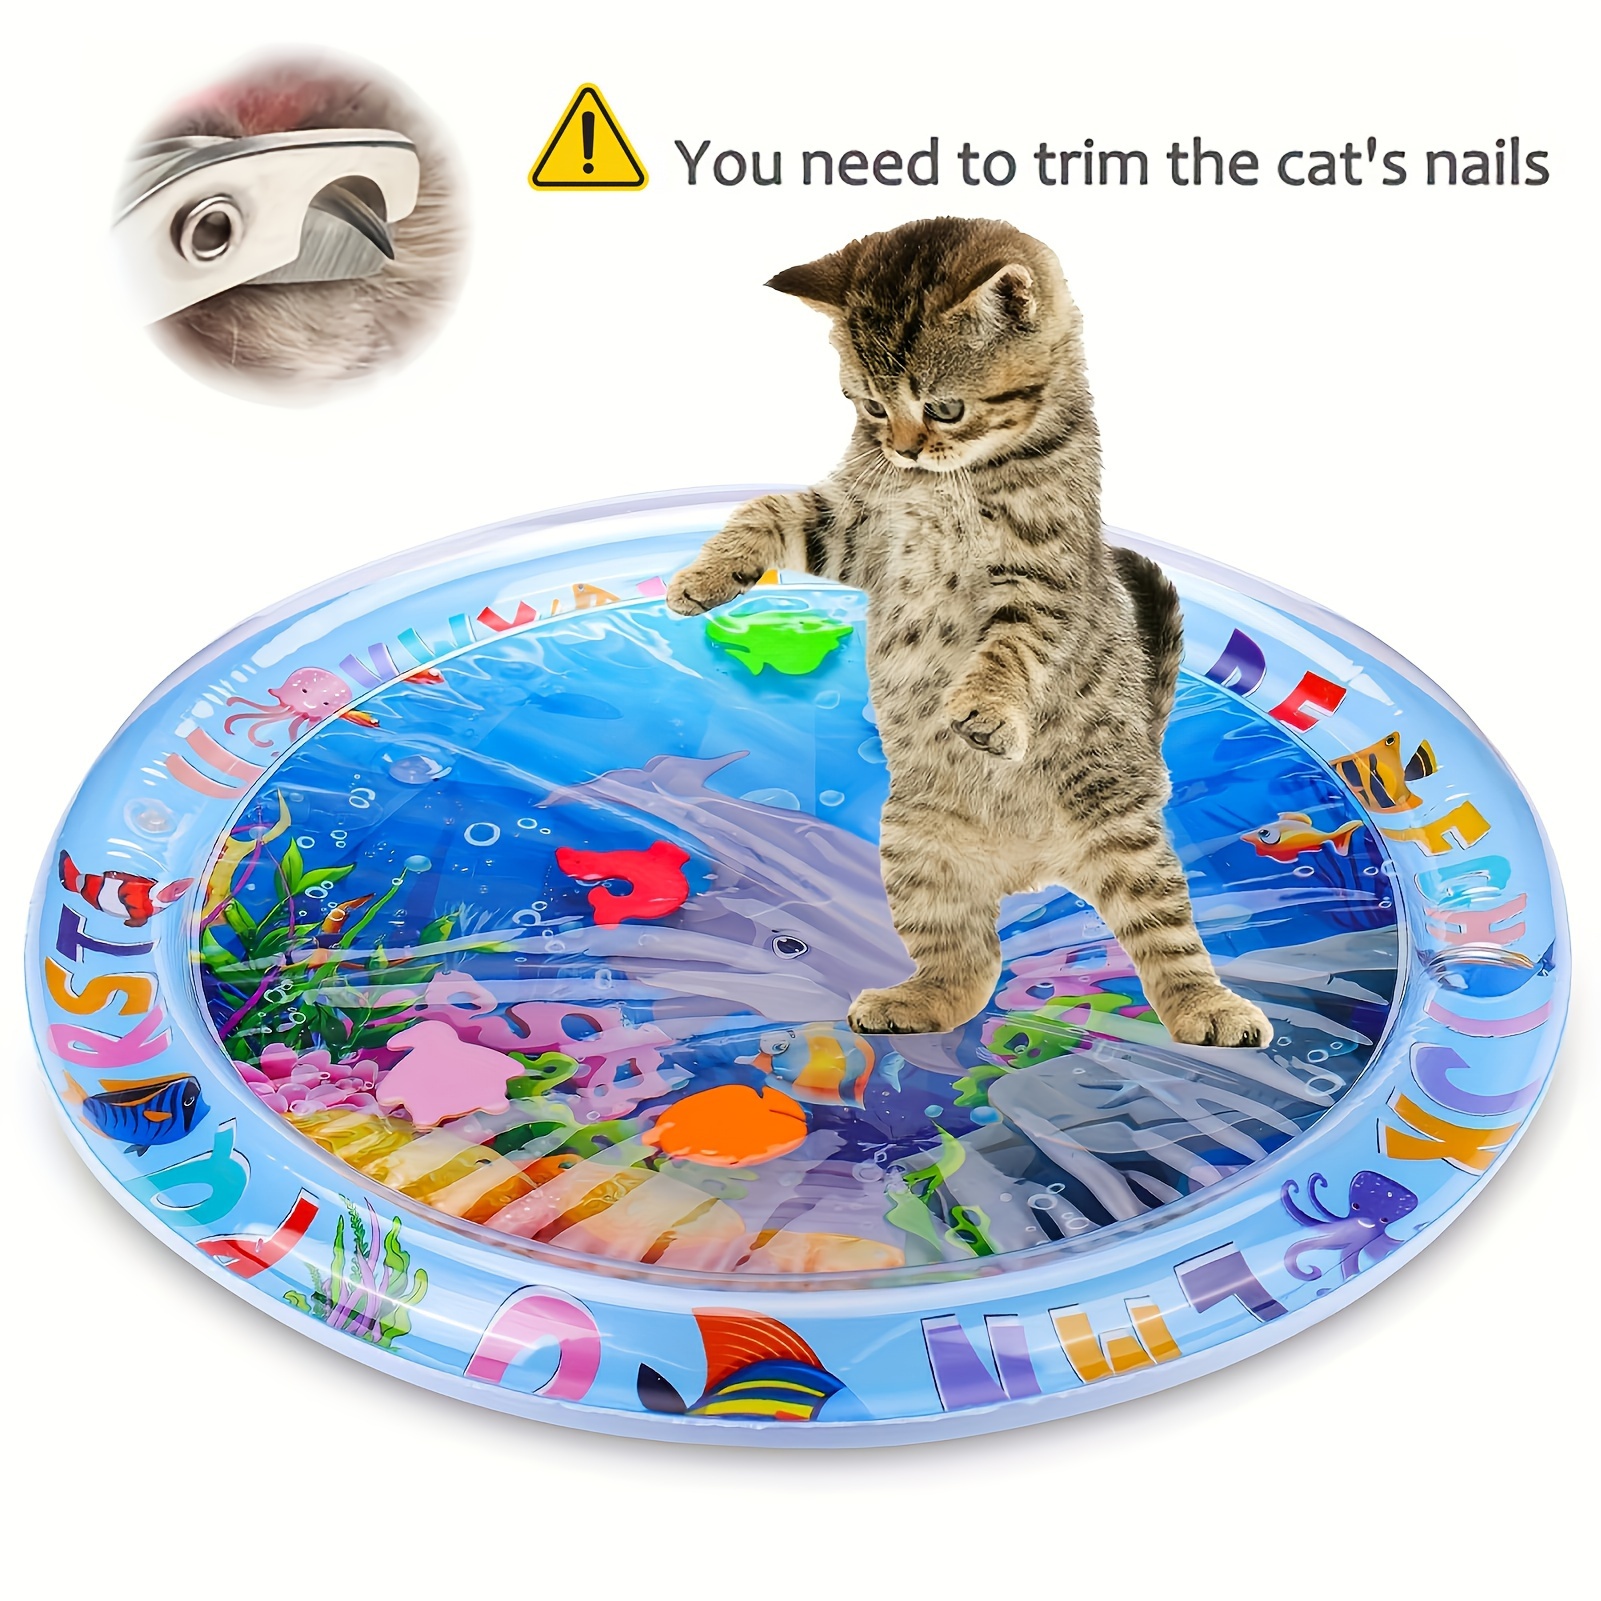 

Interactive Water-sensing Cat Play Mat - Splash-proof Pvc Pad With Floating Fish Design For Indoor Cats, Battery-free